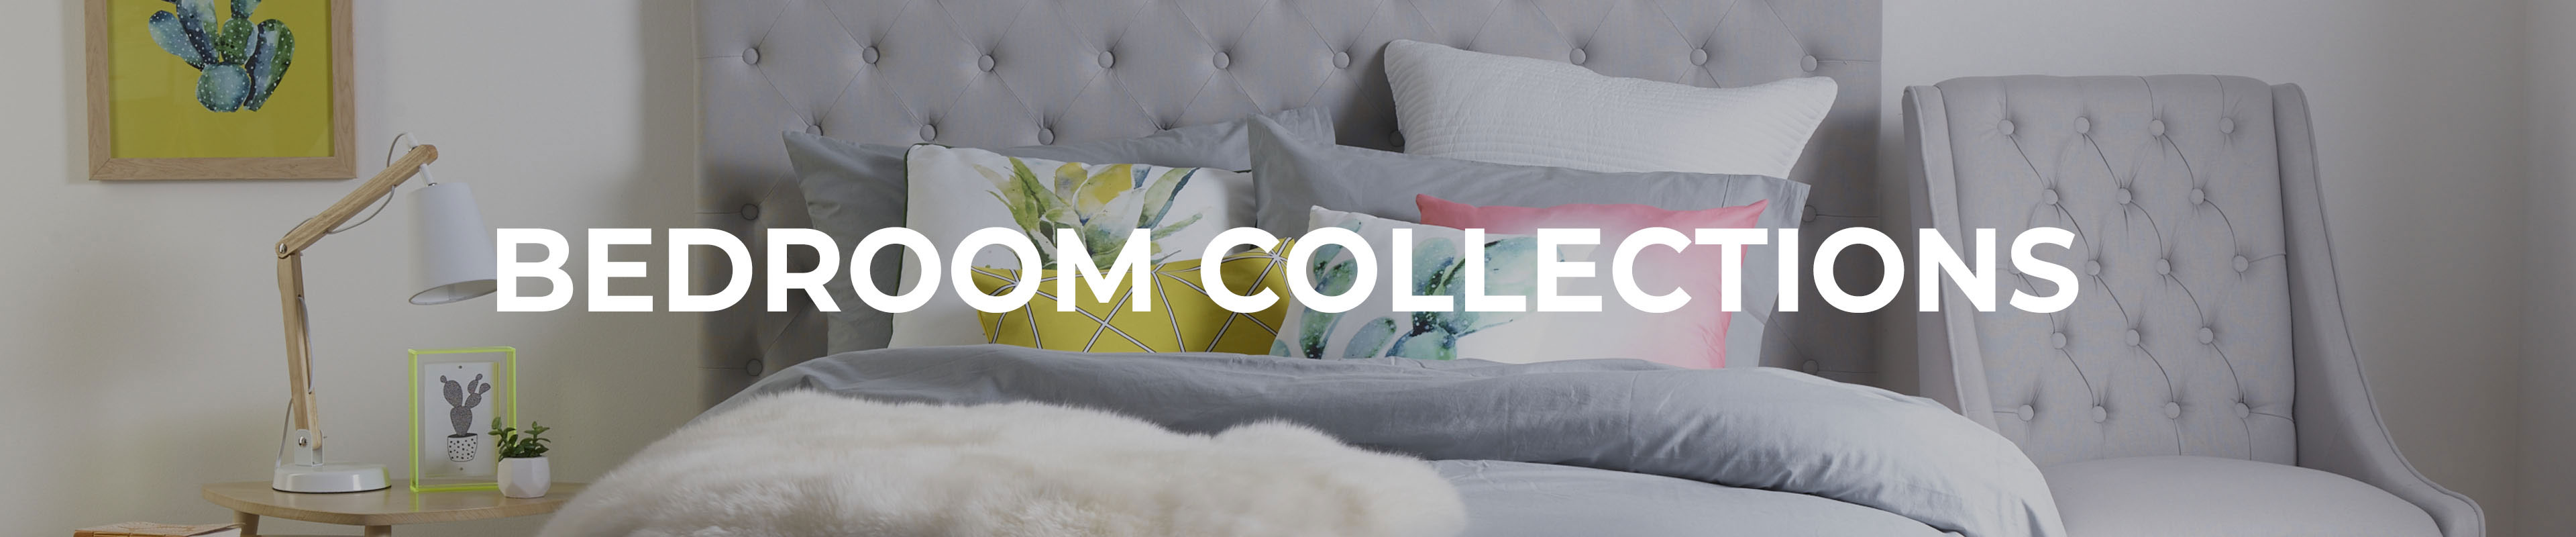 Shop Our Bedroom Collections